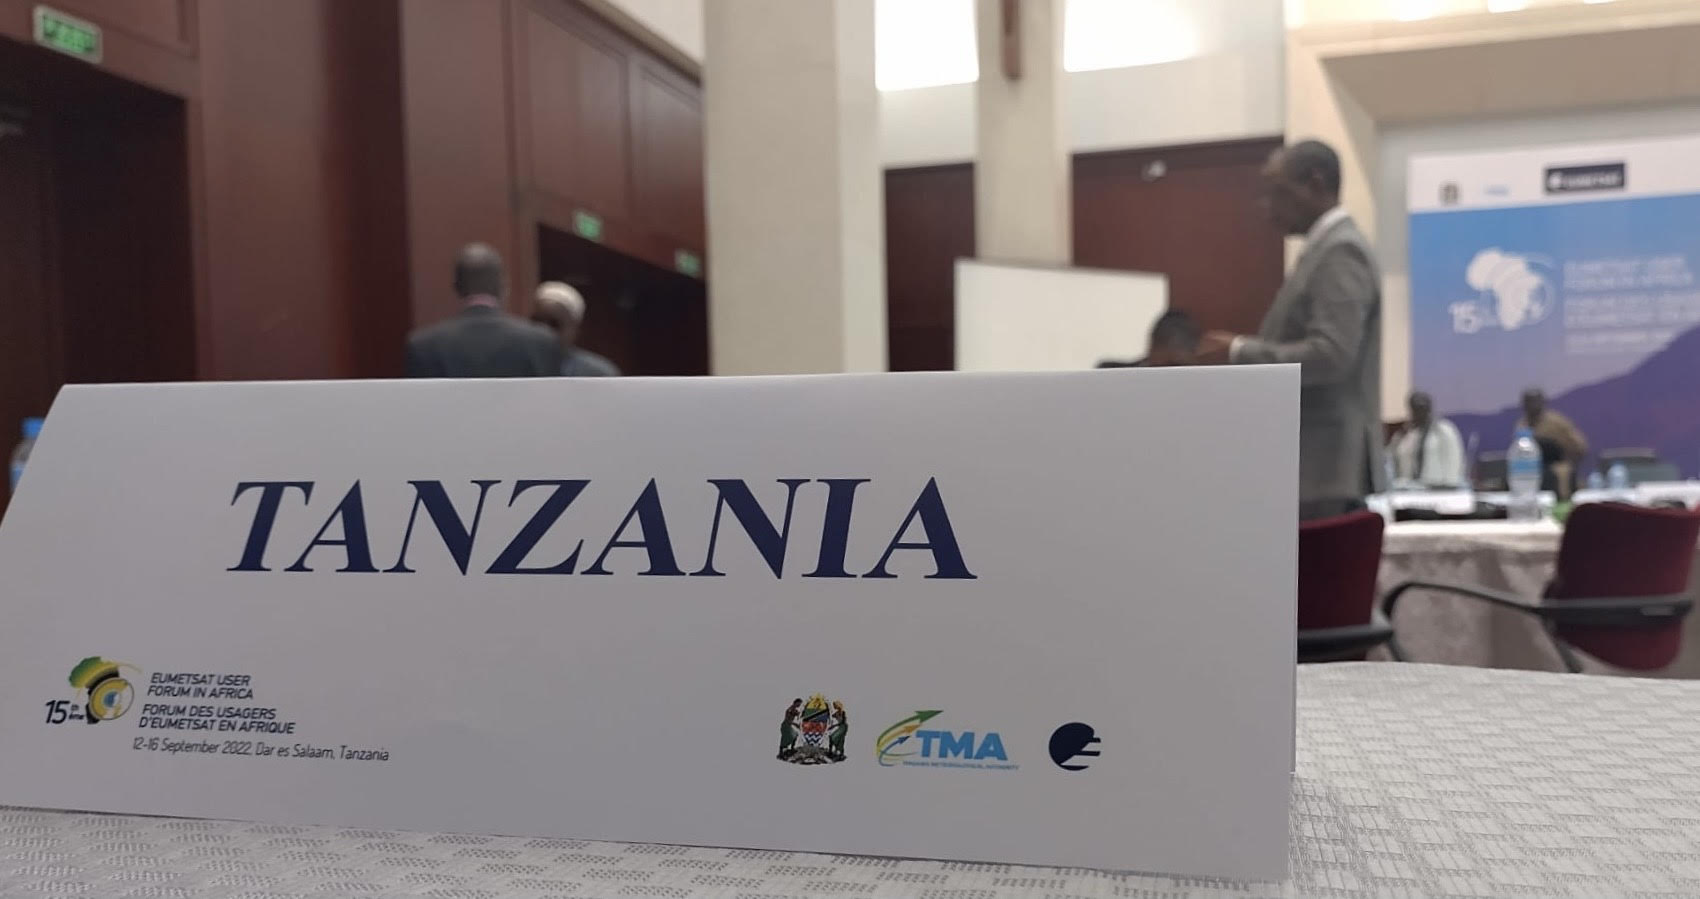 We are at the 15th EUMETSAT African User Forum, this time in Tanzania